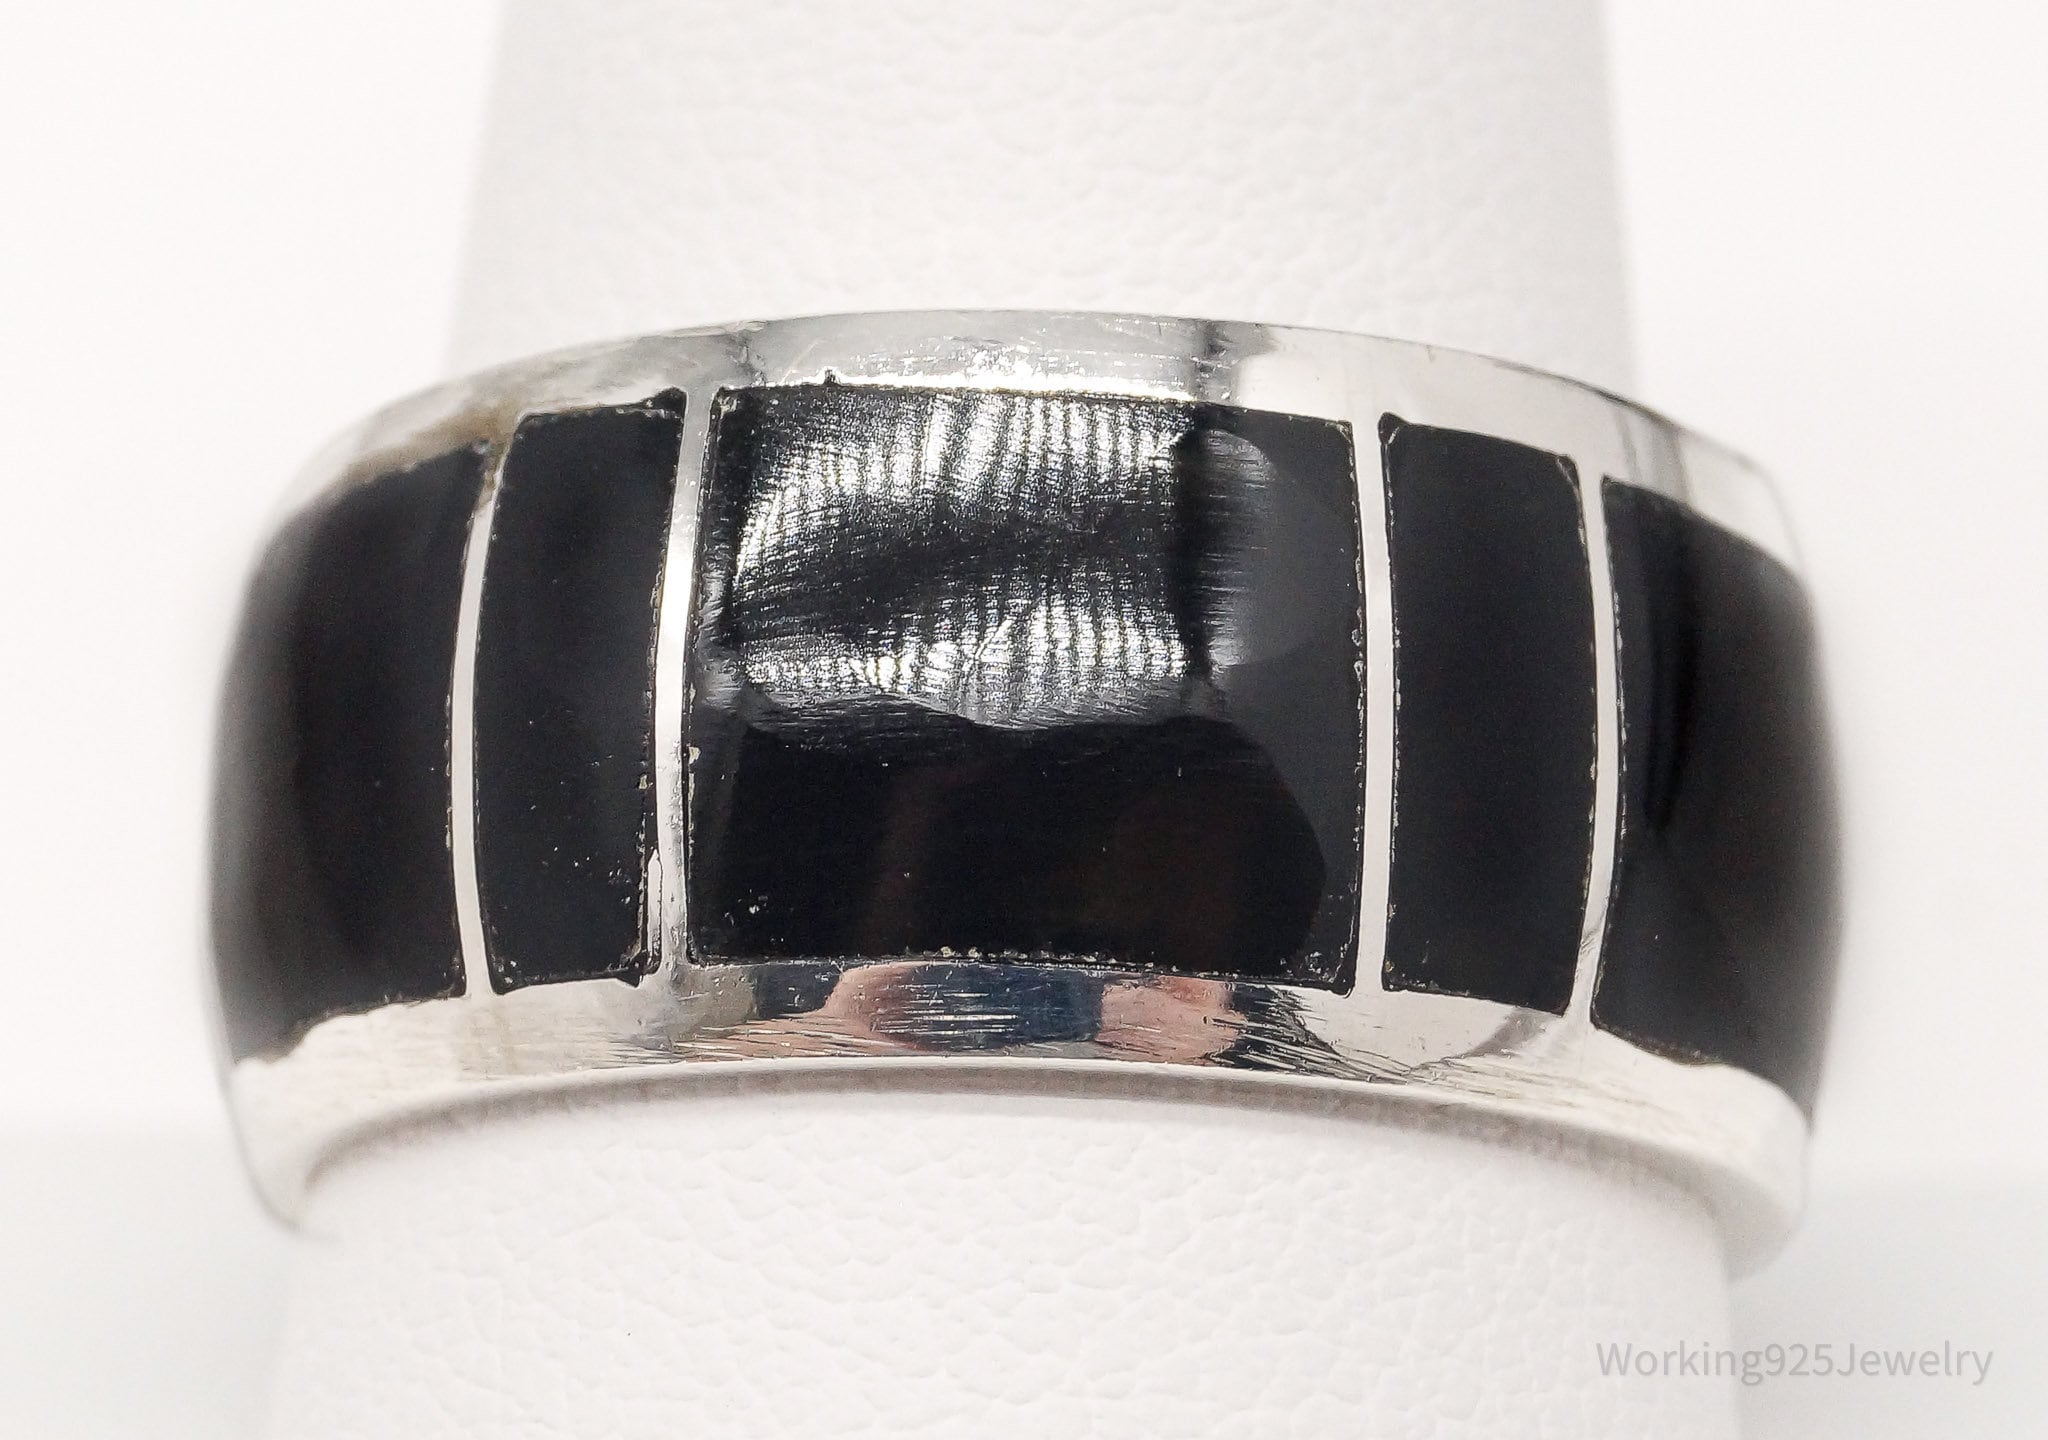 Vintage Mexico Escorcia Black Onyx Inlay Sterling Silver Ring - Size 11